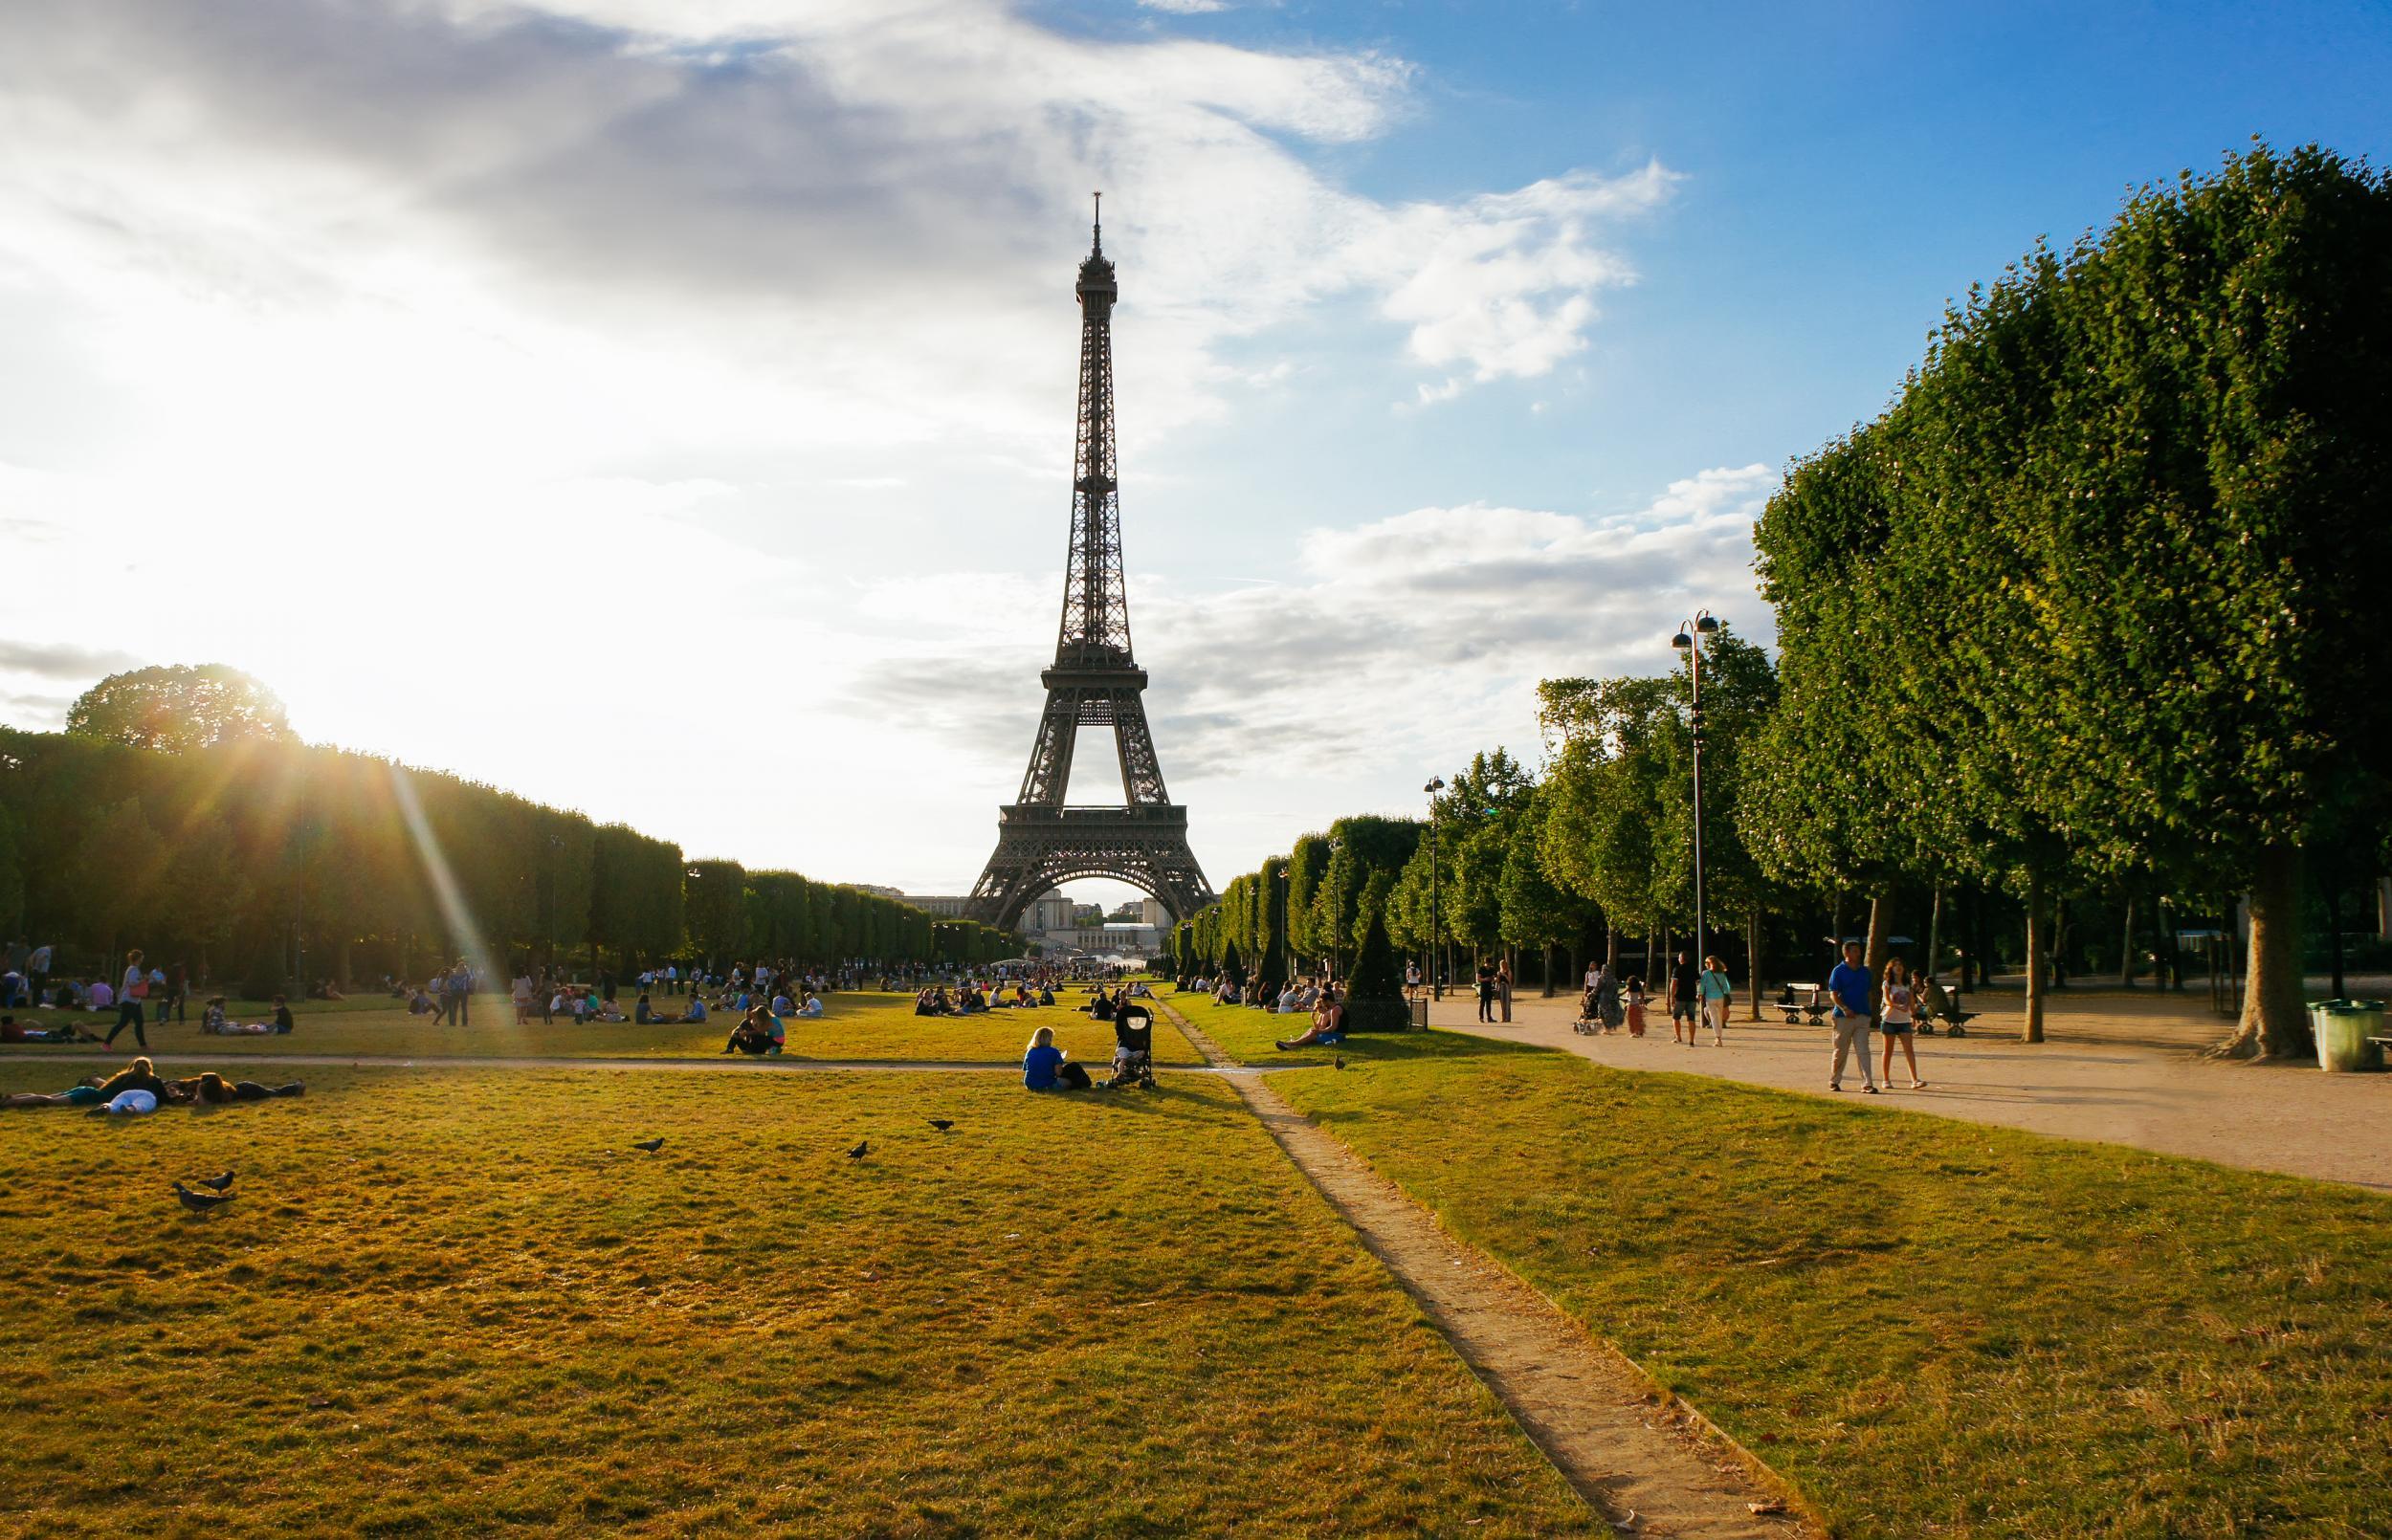 You can spend nearly 10 hours in Paris for £58 return